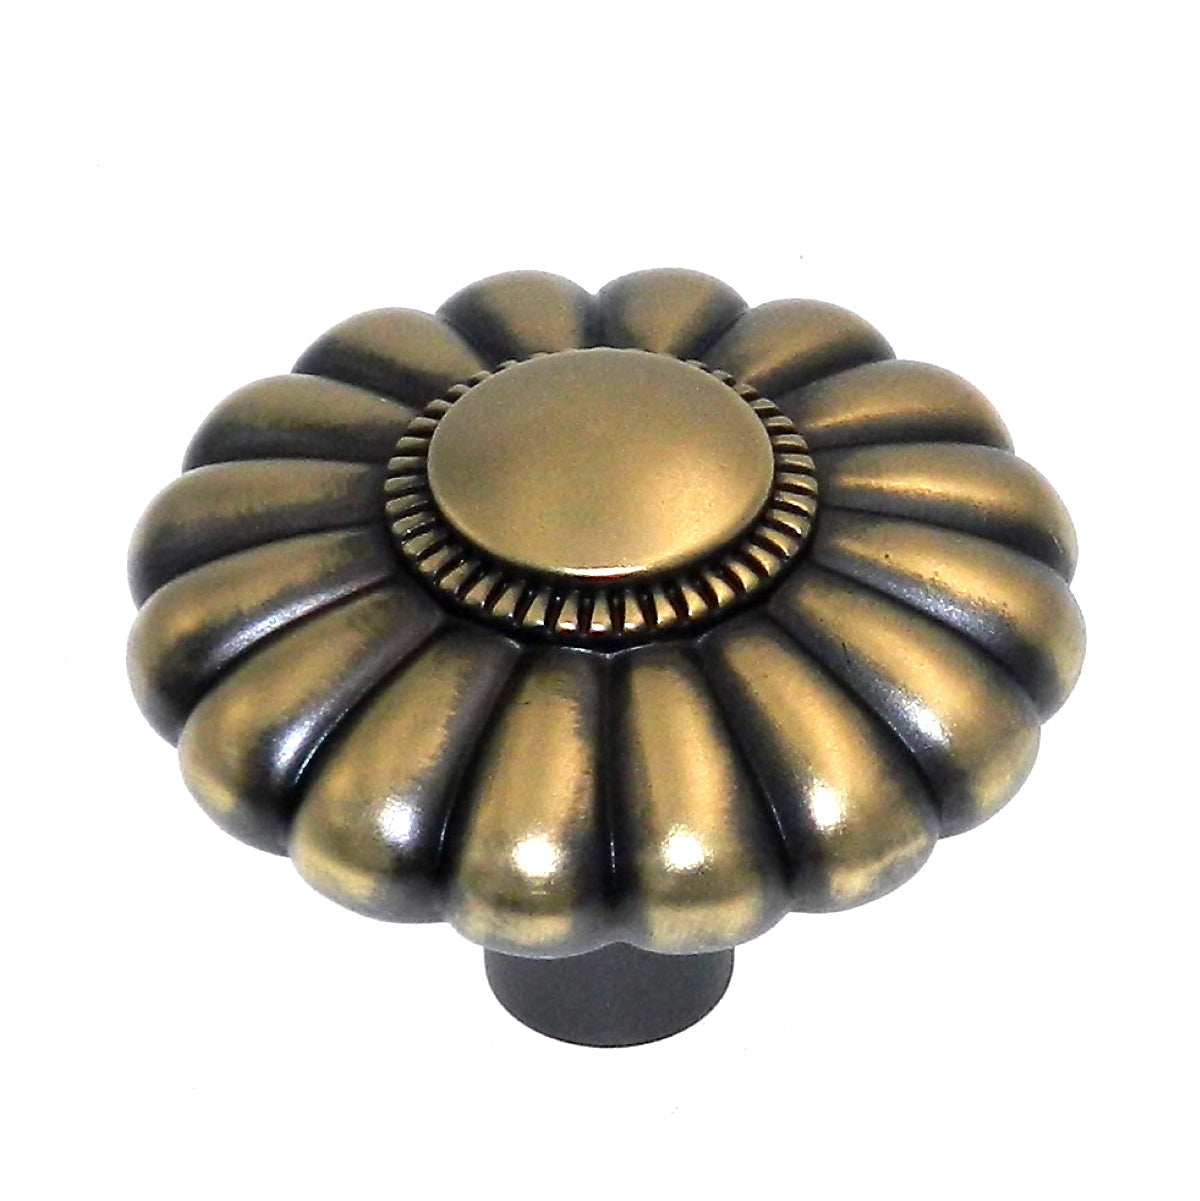 10 Pack Belwith Keeler Beaded Classic 1 1/2 Winchester Brass Beaded Solid  Brass Cabinet Knob G3-06